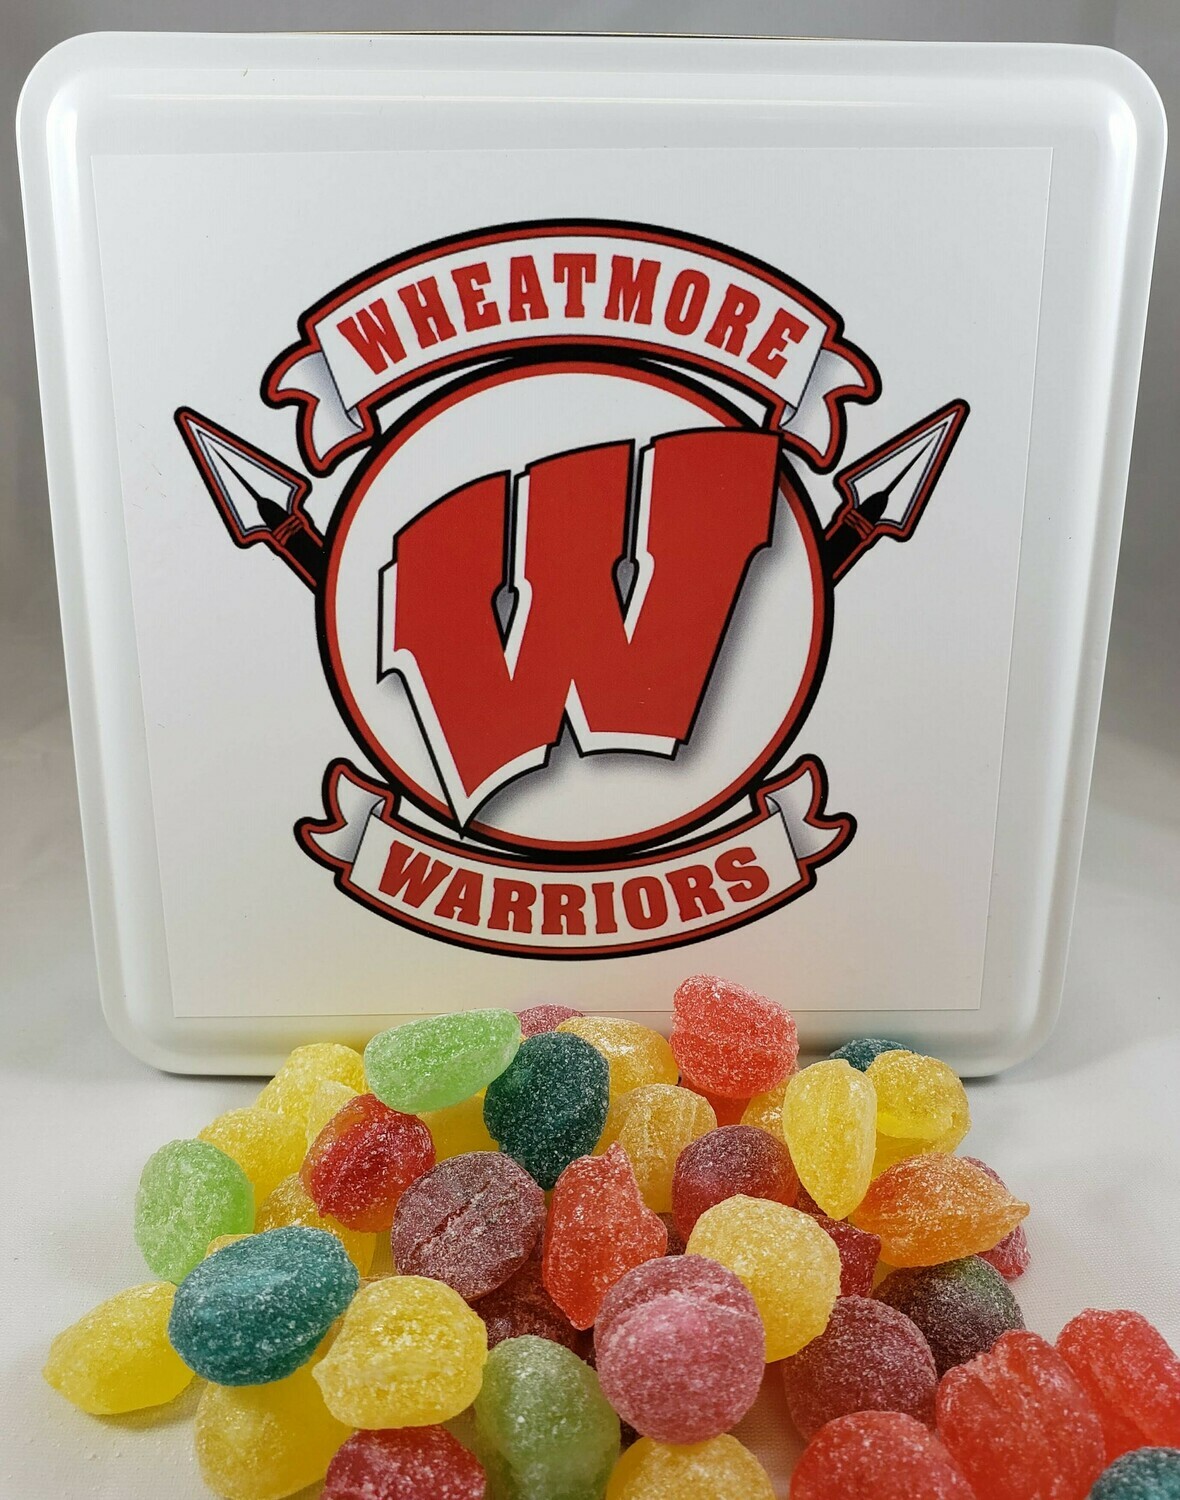 Wheatmore Warriors Candy Tin with 13.5 oz. of Candy - Your Choice